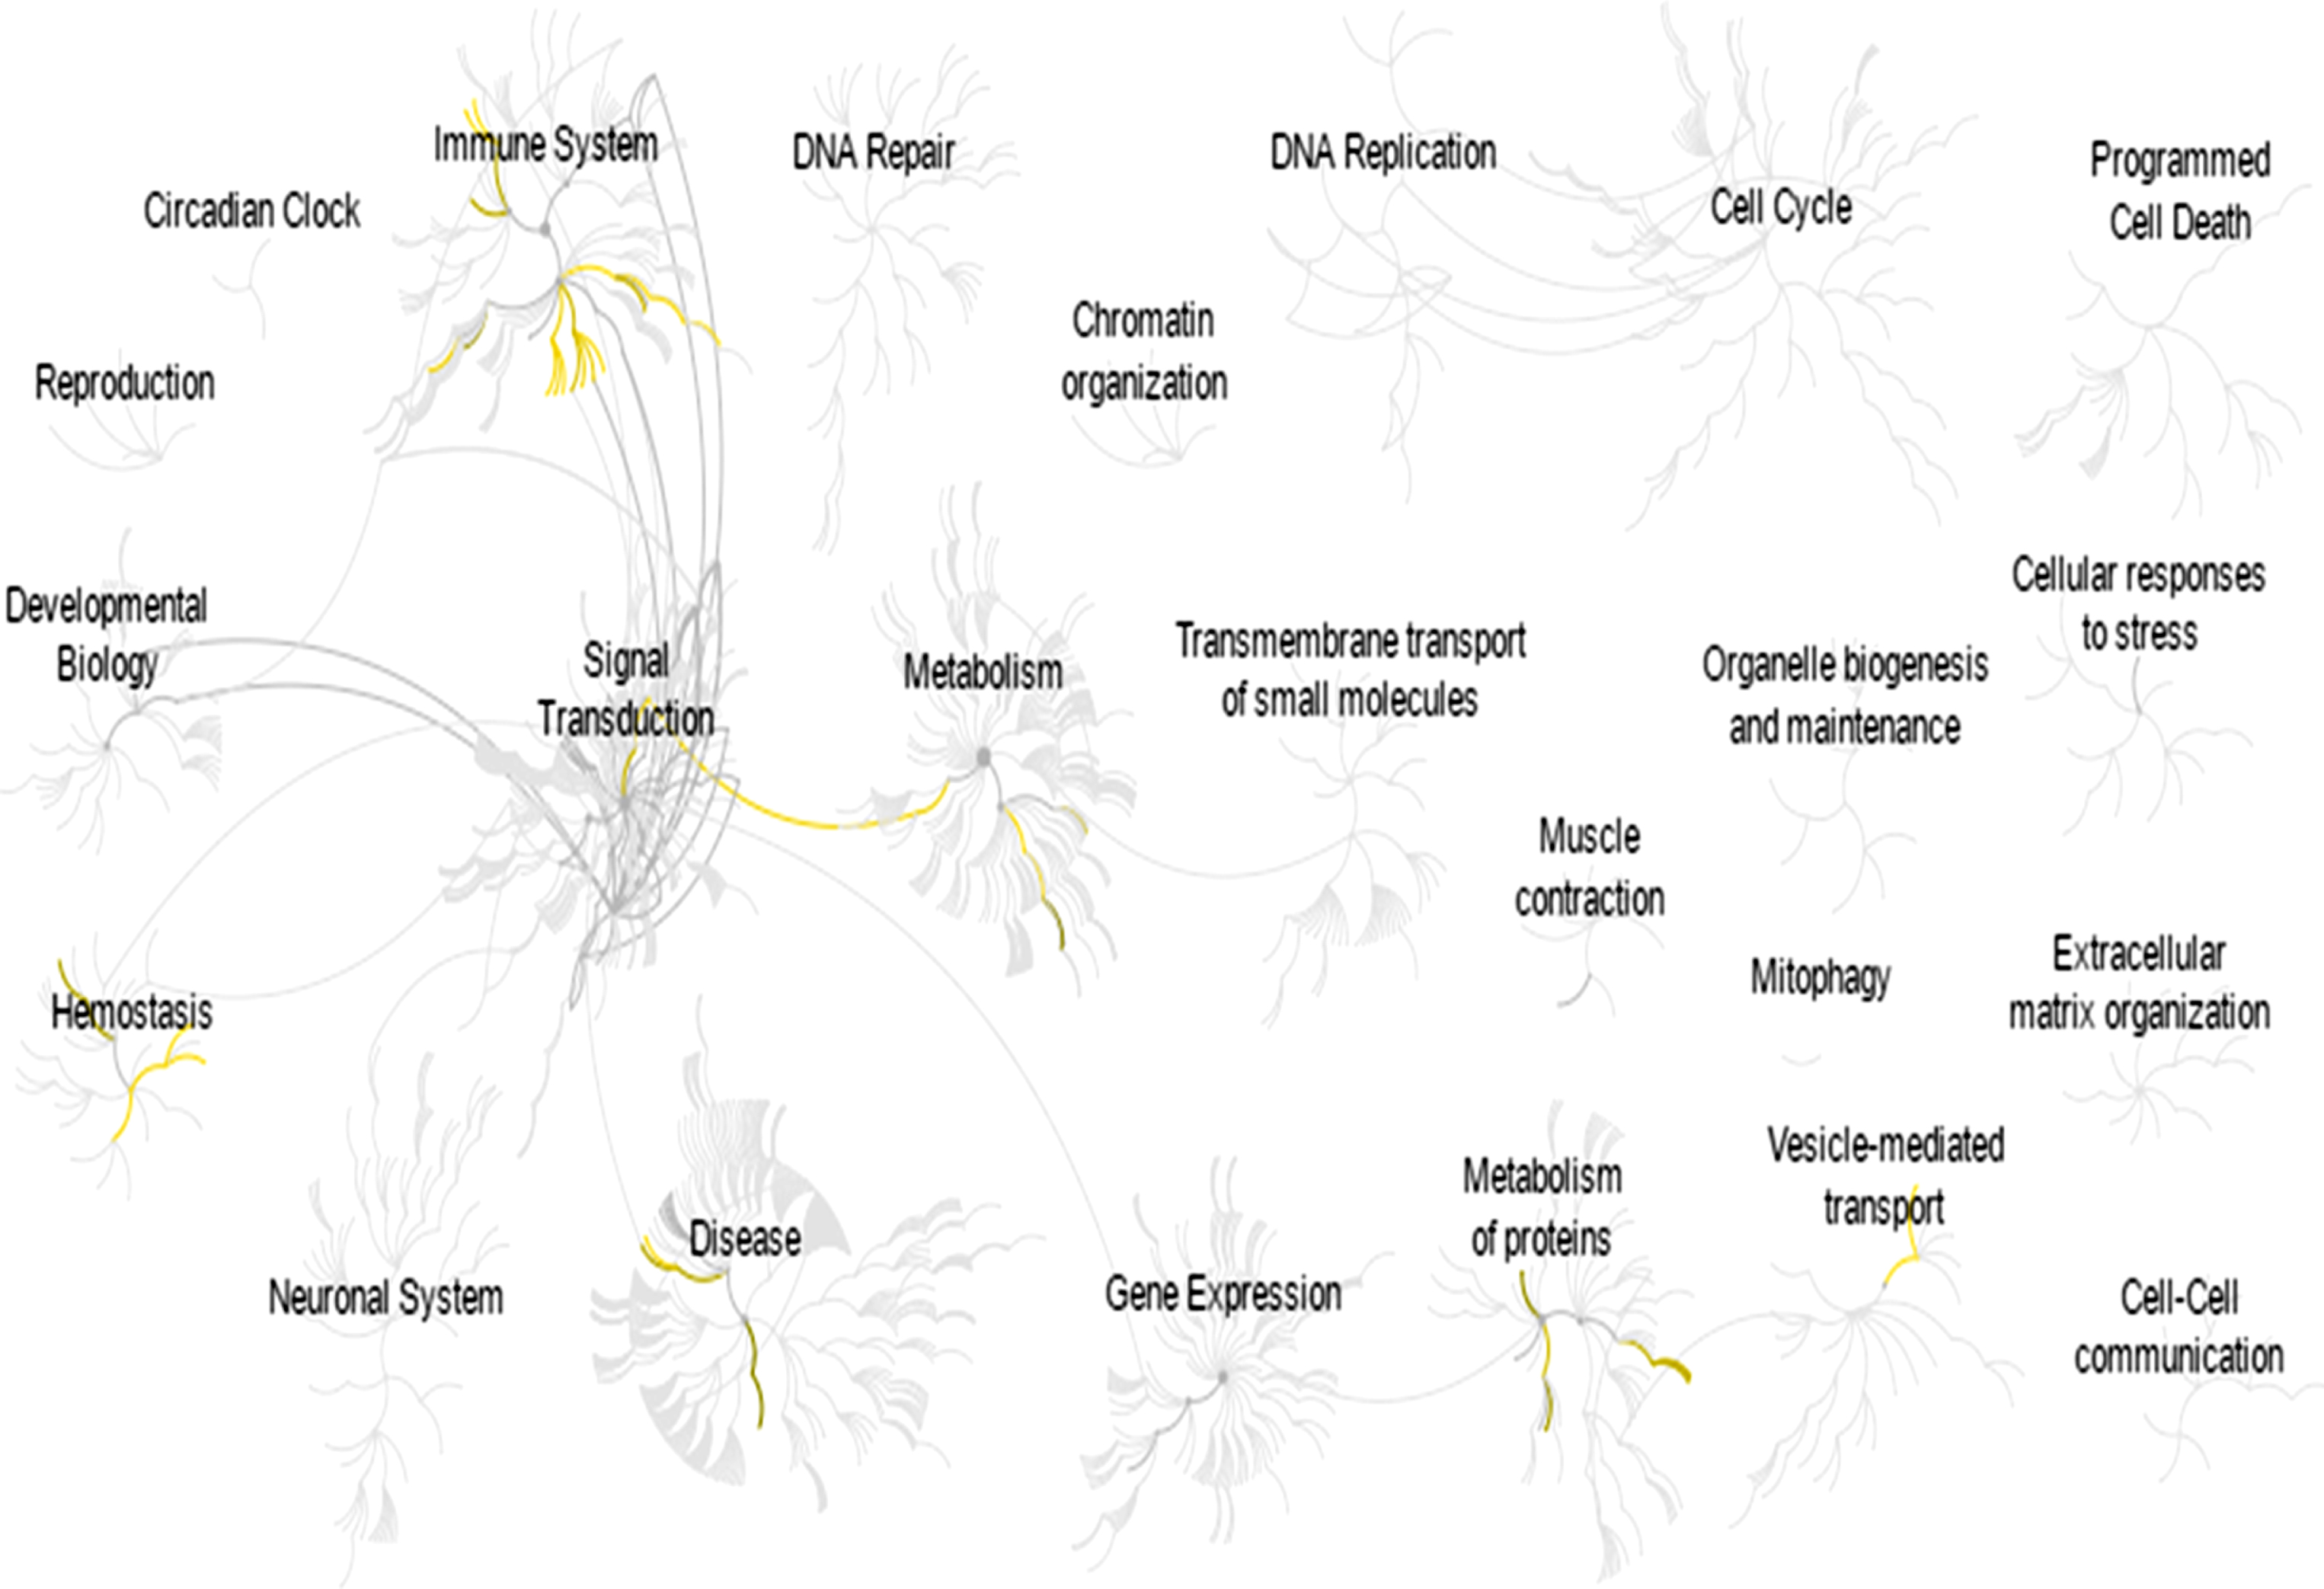 Reactome-generated biological pathway [24] involved in promoting particular biological events. The yellow network represents a significantly involved pathway in relation to differentially expressed protein. The grey network represents the pathways that were identified by the Reactome database.